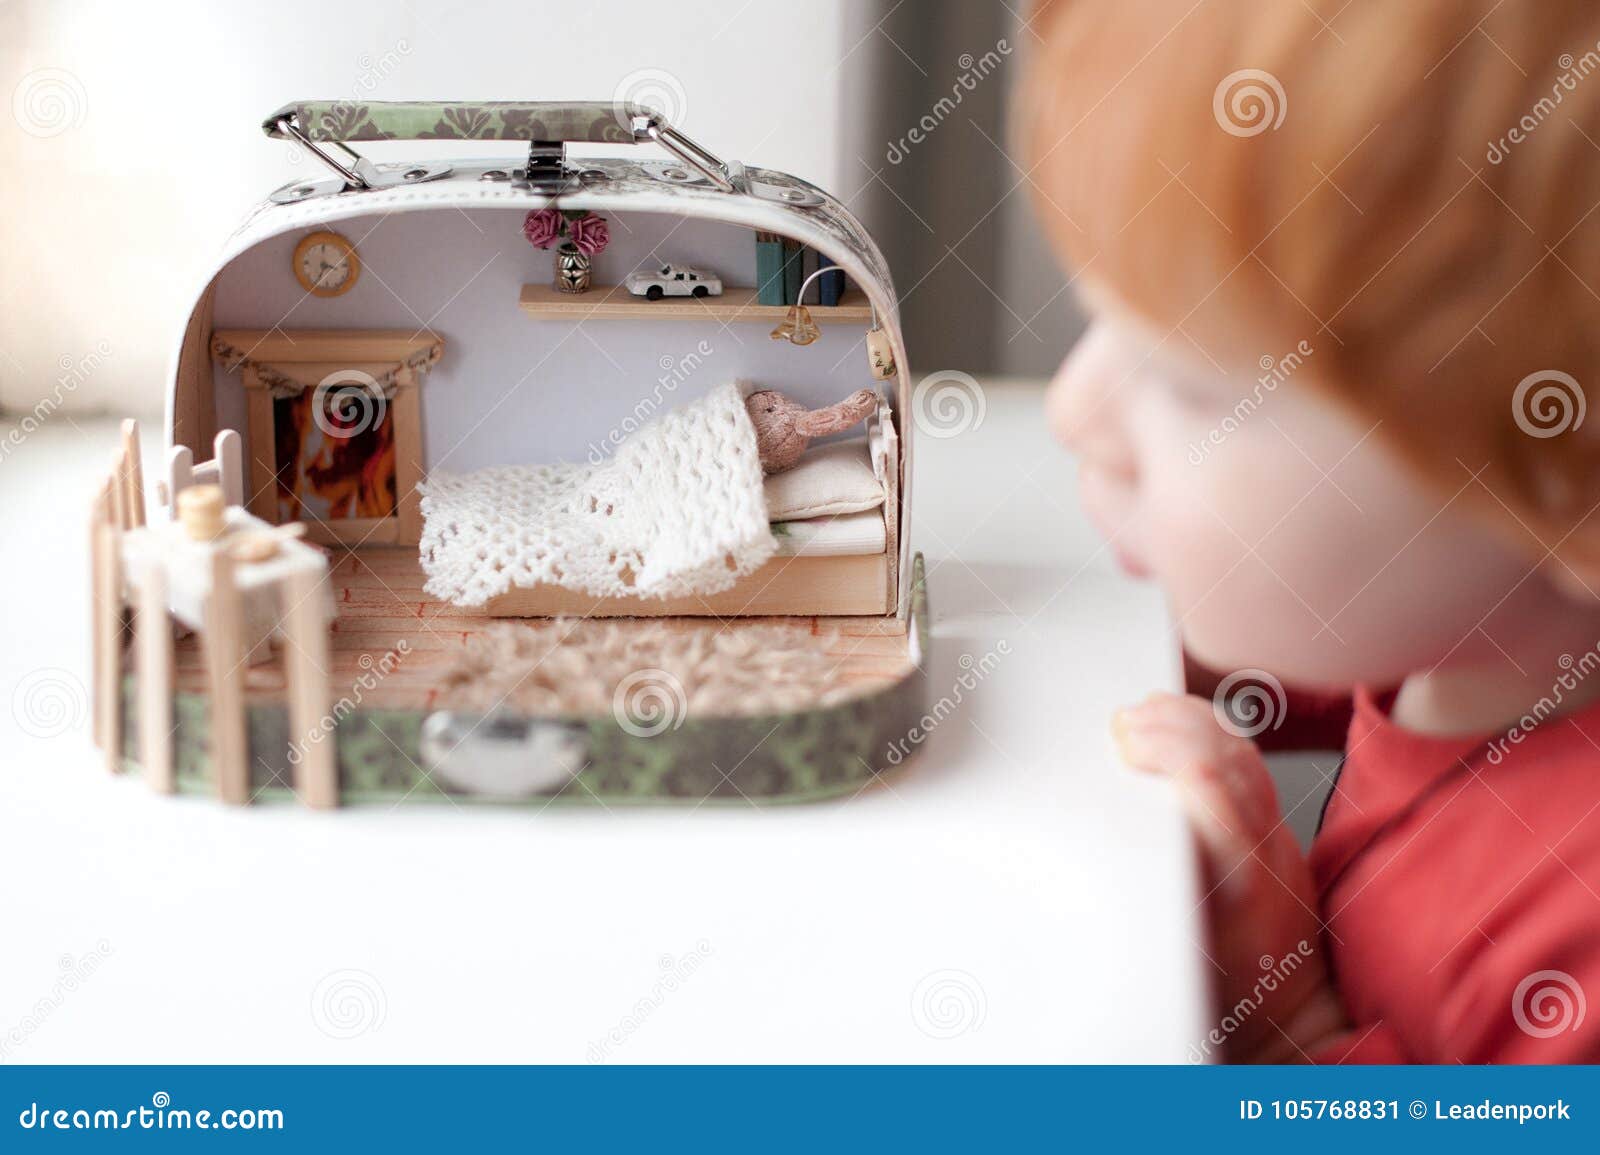 looking for a doll house